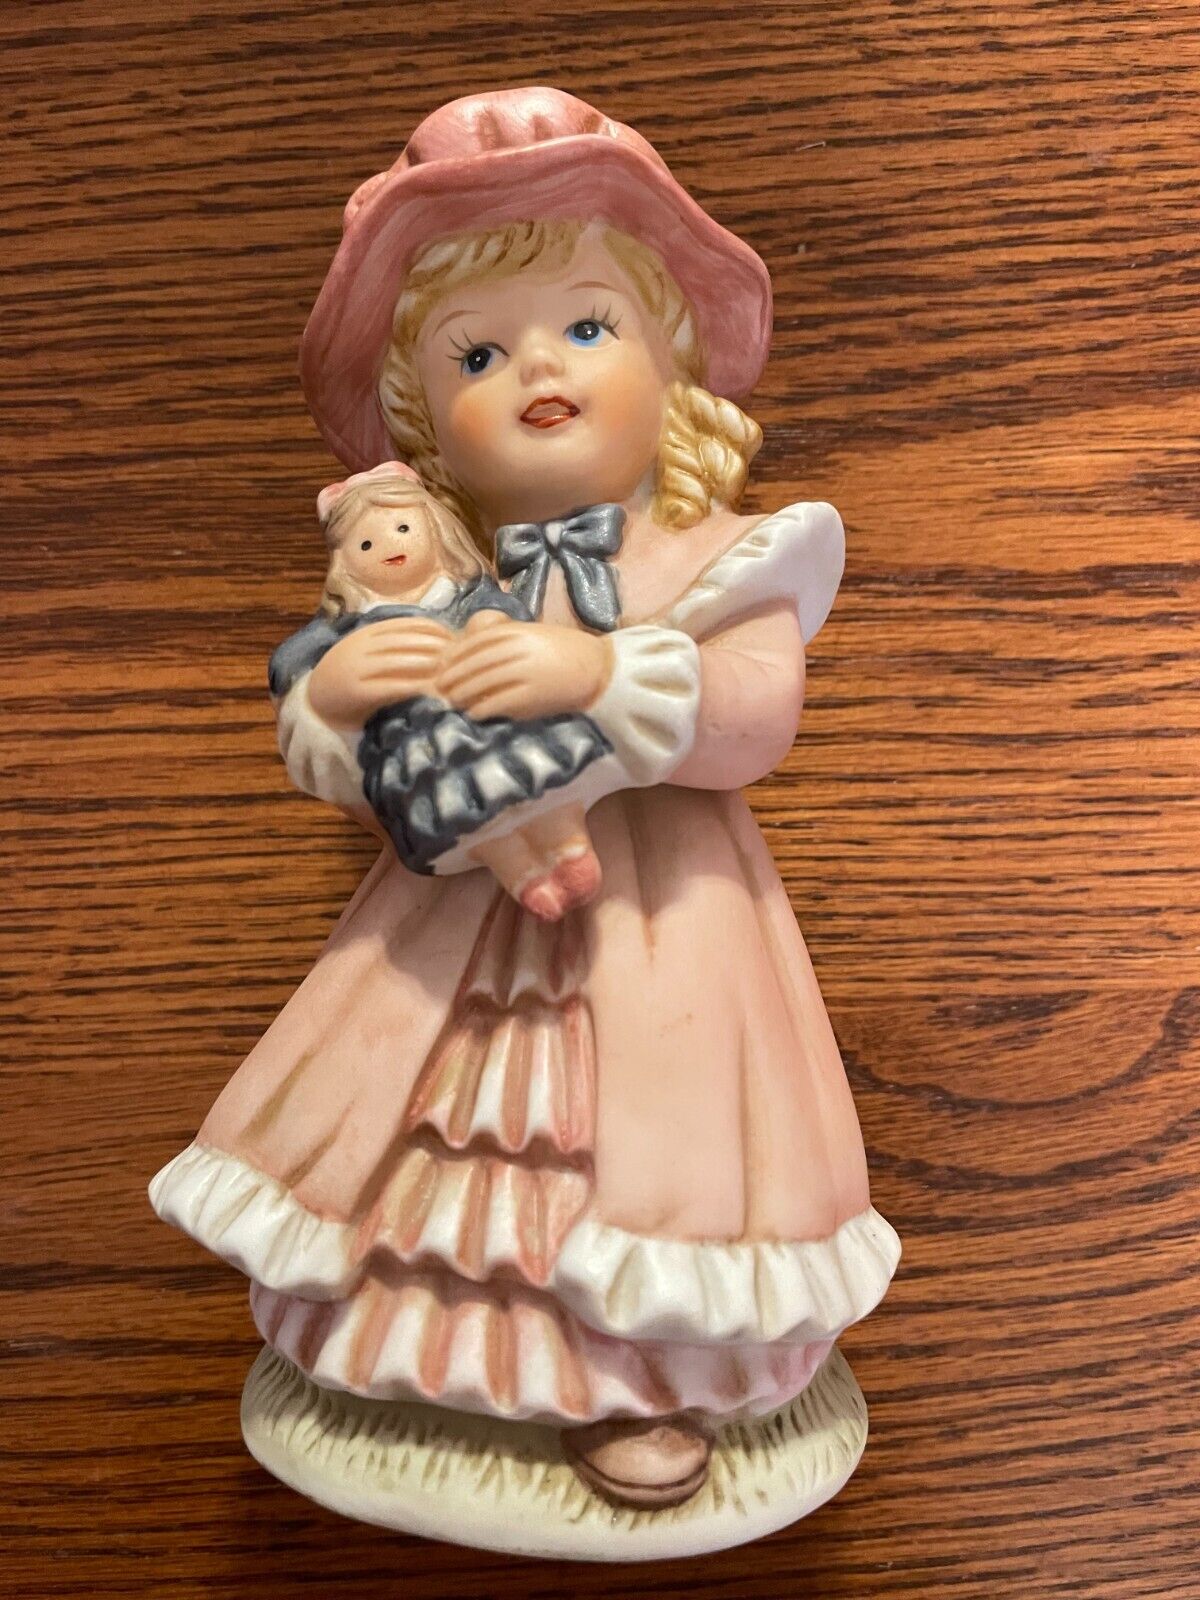 Homco Girl with Doll Figurine, # 1419, vintage, collectible, home decor,